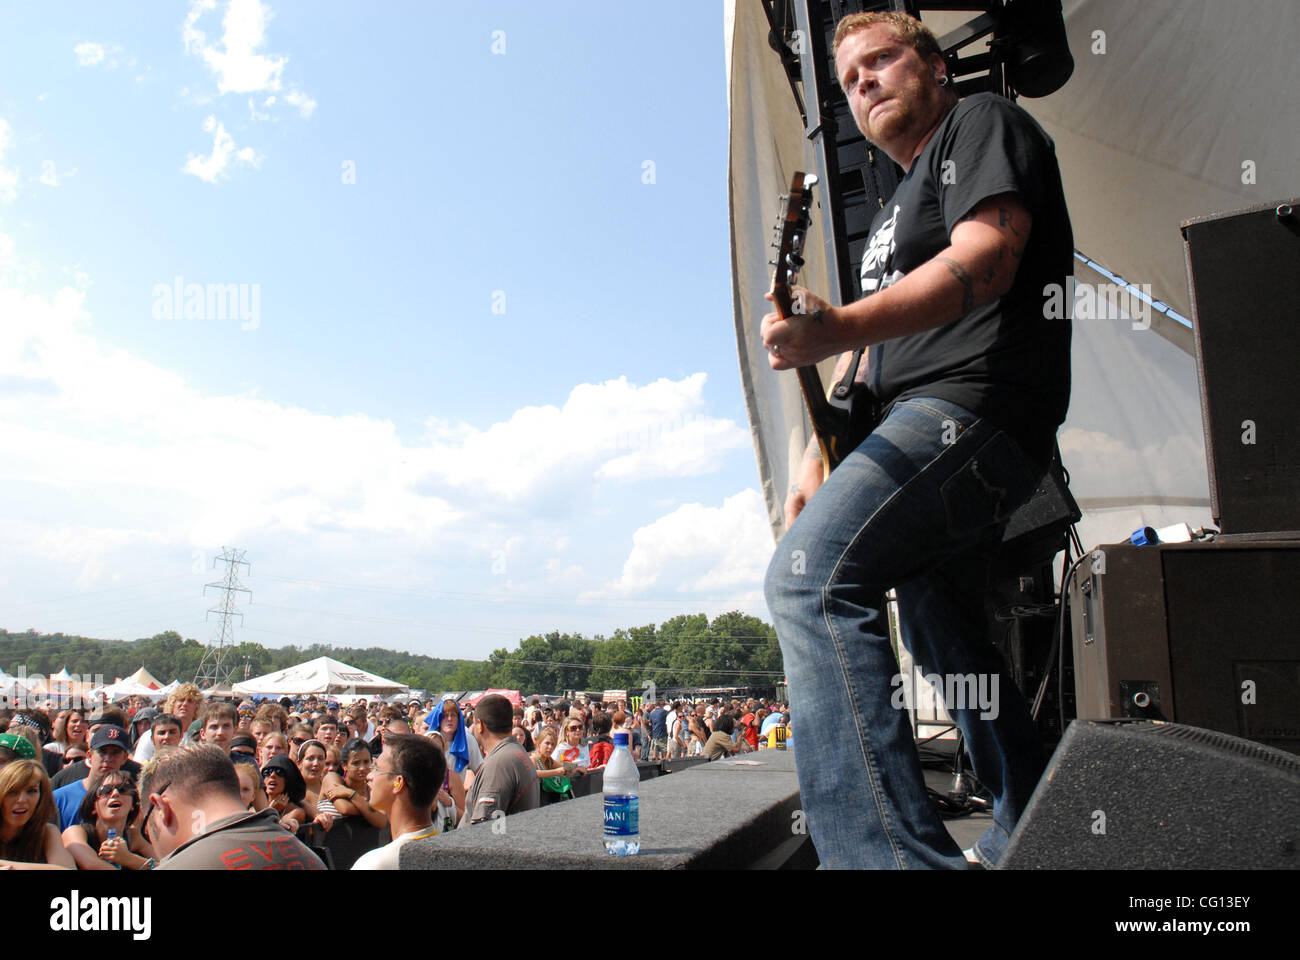 Jul. 23, 2007; Charlotte, NC USA; Guitarist MIKE GOLLA of the band The Starting Line performs live as part of the 13th annual Vans Warped Tour that took place at the Verizon Wireless Amphitheater located in Charlotte. Mandatory Credit: Photo by Jason Moore (©) Copyright 2007 by Jason Moore Stock Photo